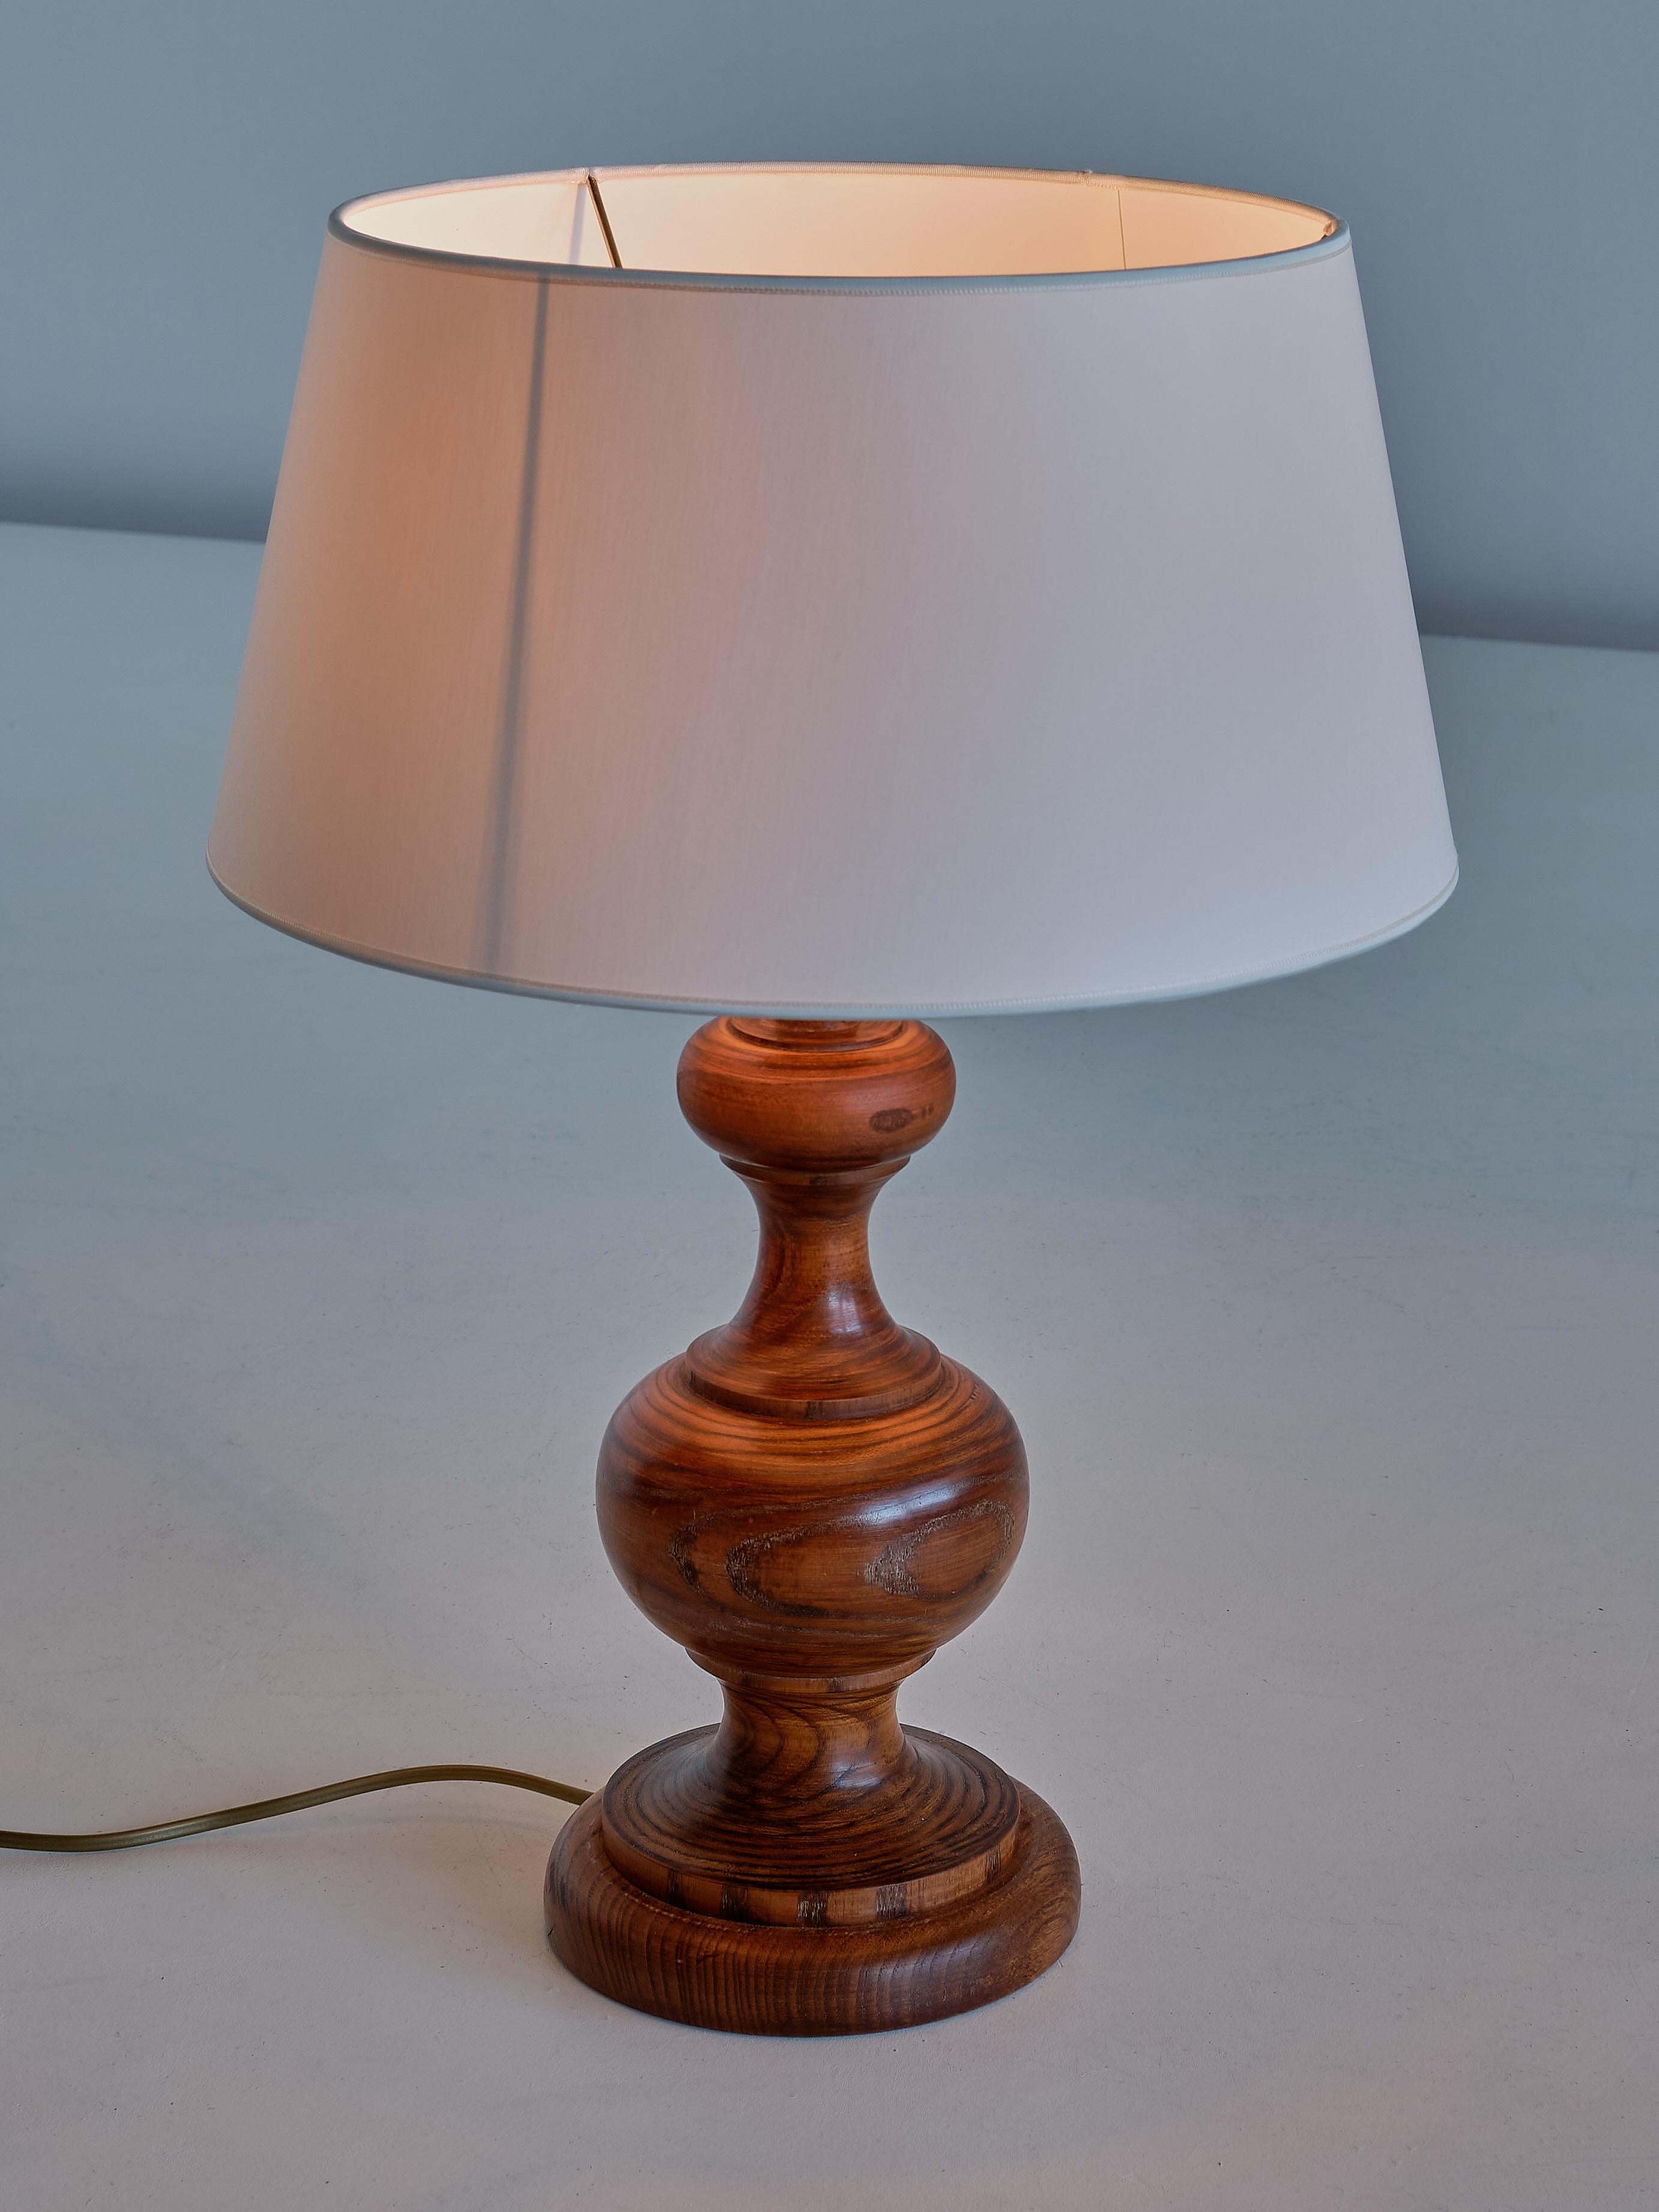 Mid-20th Century French Modern Table Lamp in Oak with Ivory Shade, 1950s For Sale